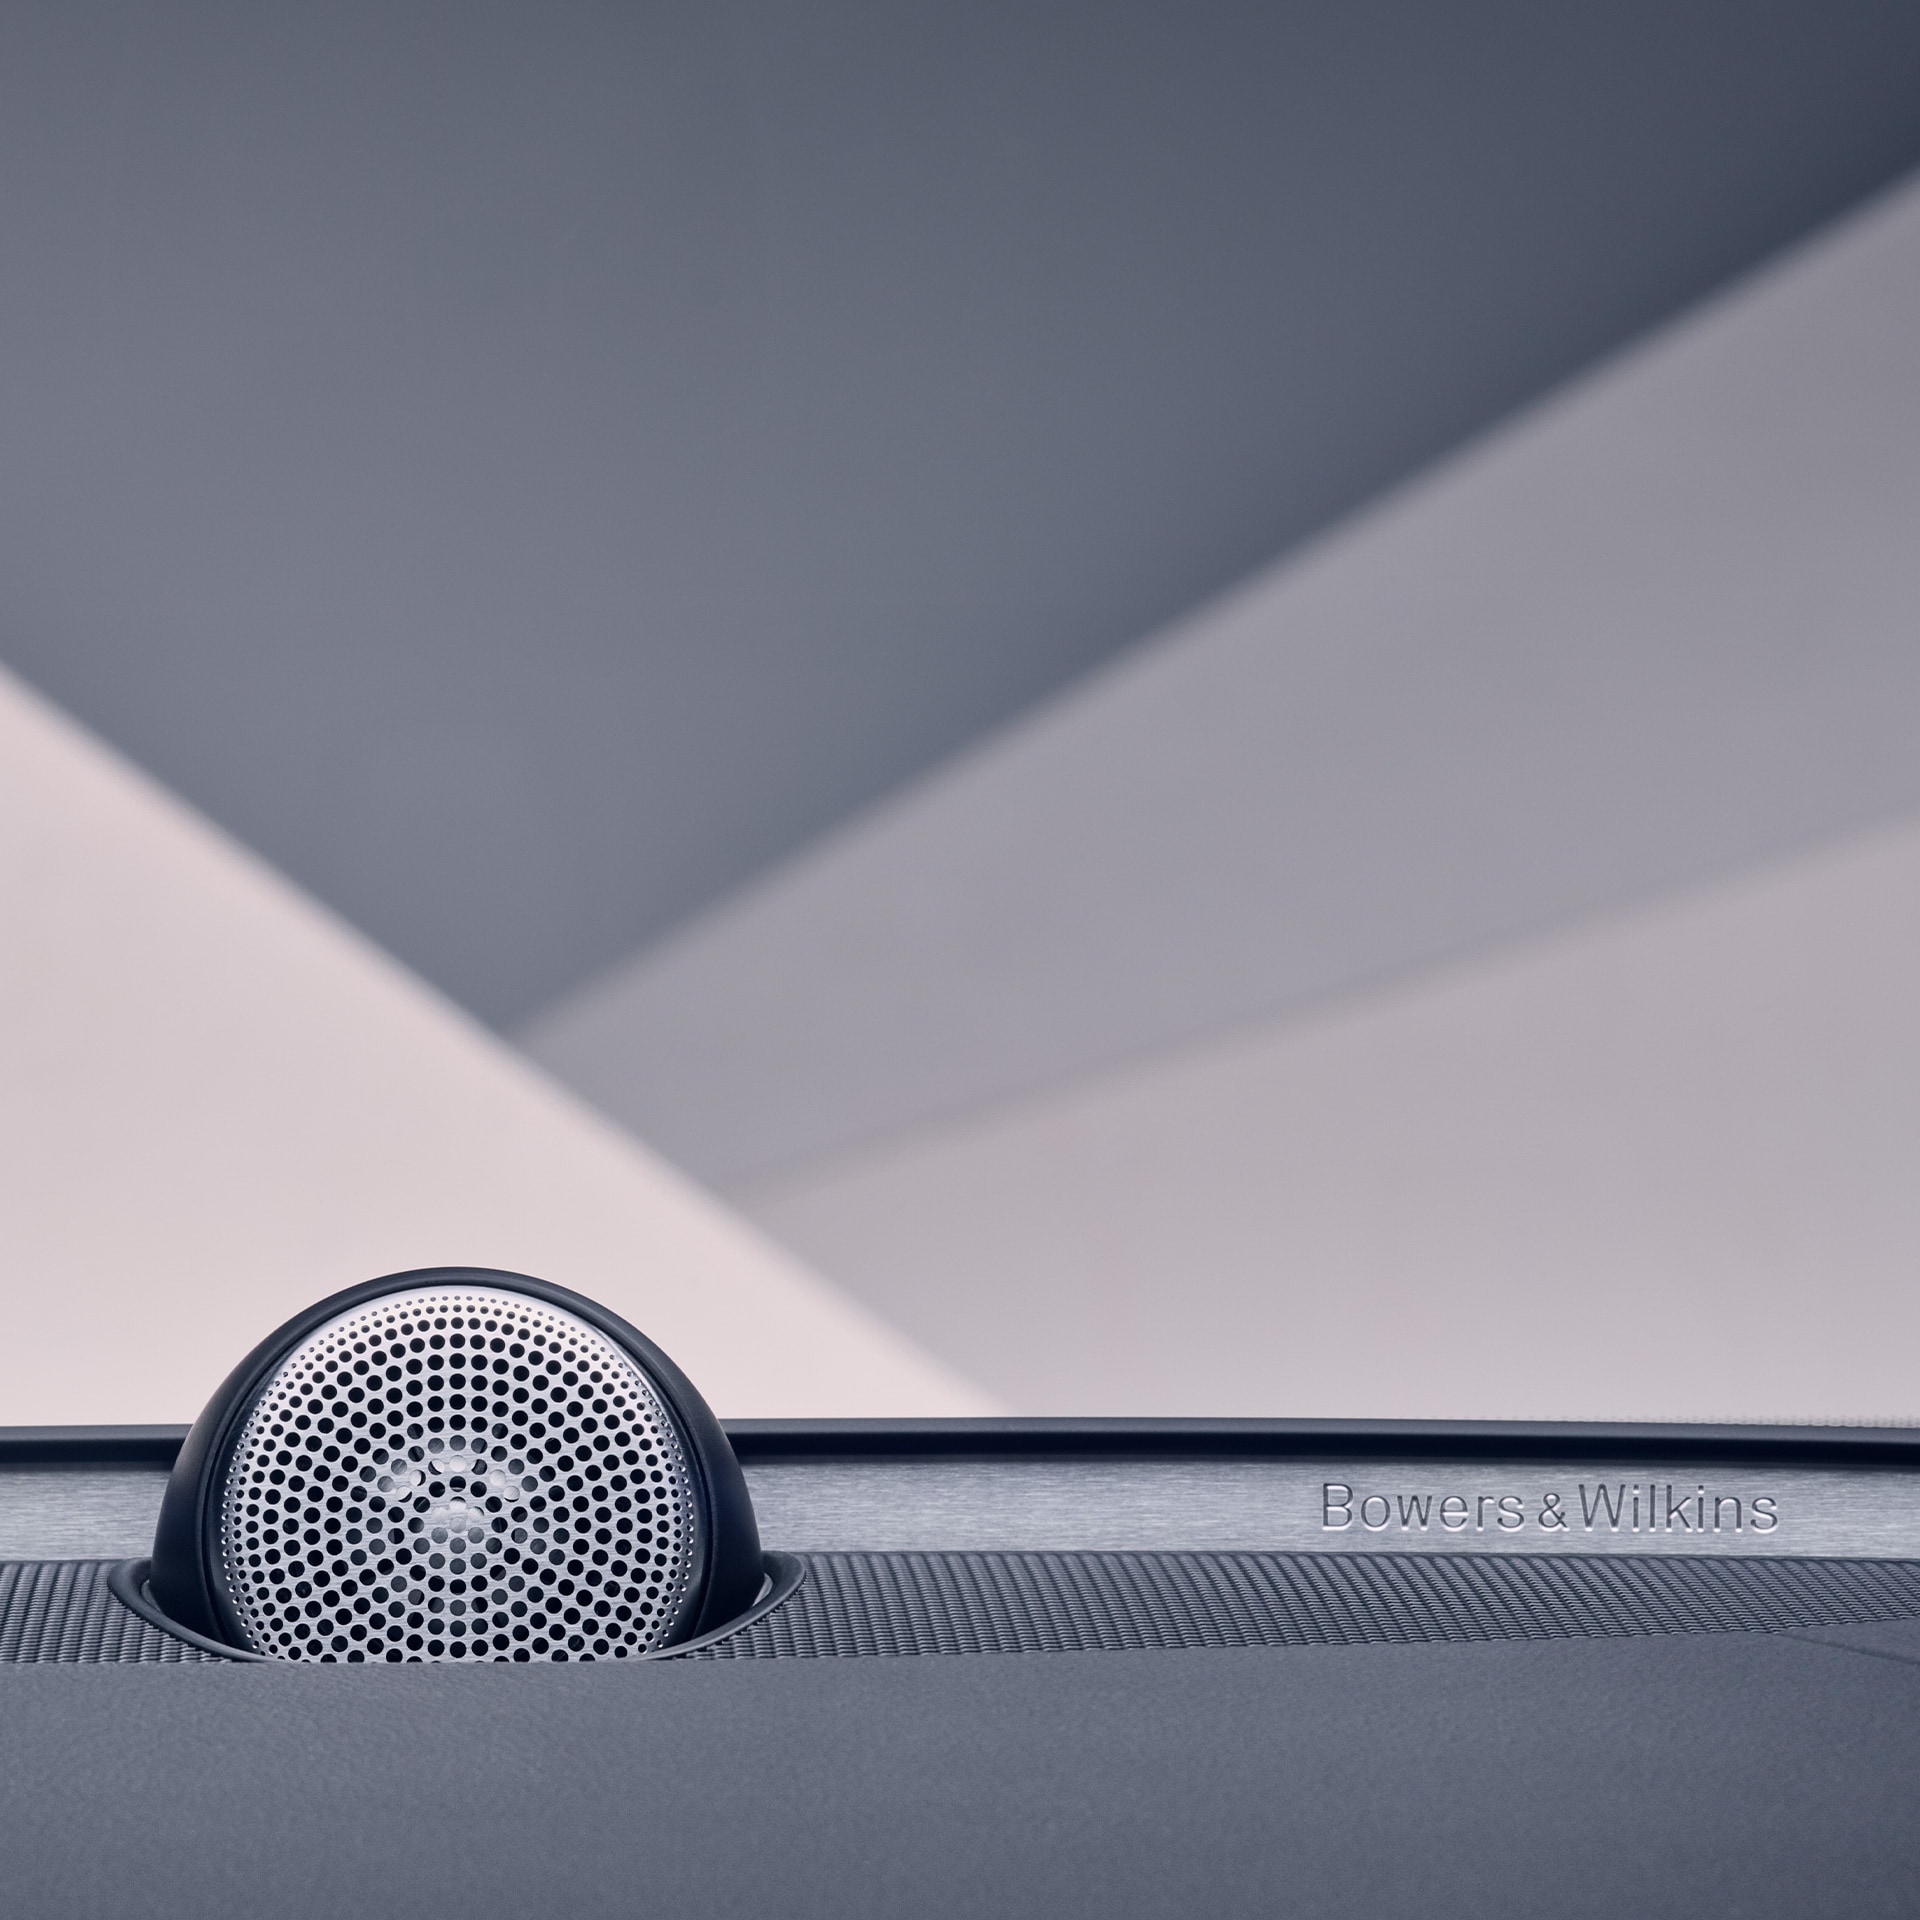 Reproduktor Bowers & Wilkins vo vozidle Volvo S90.